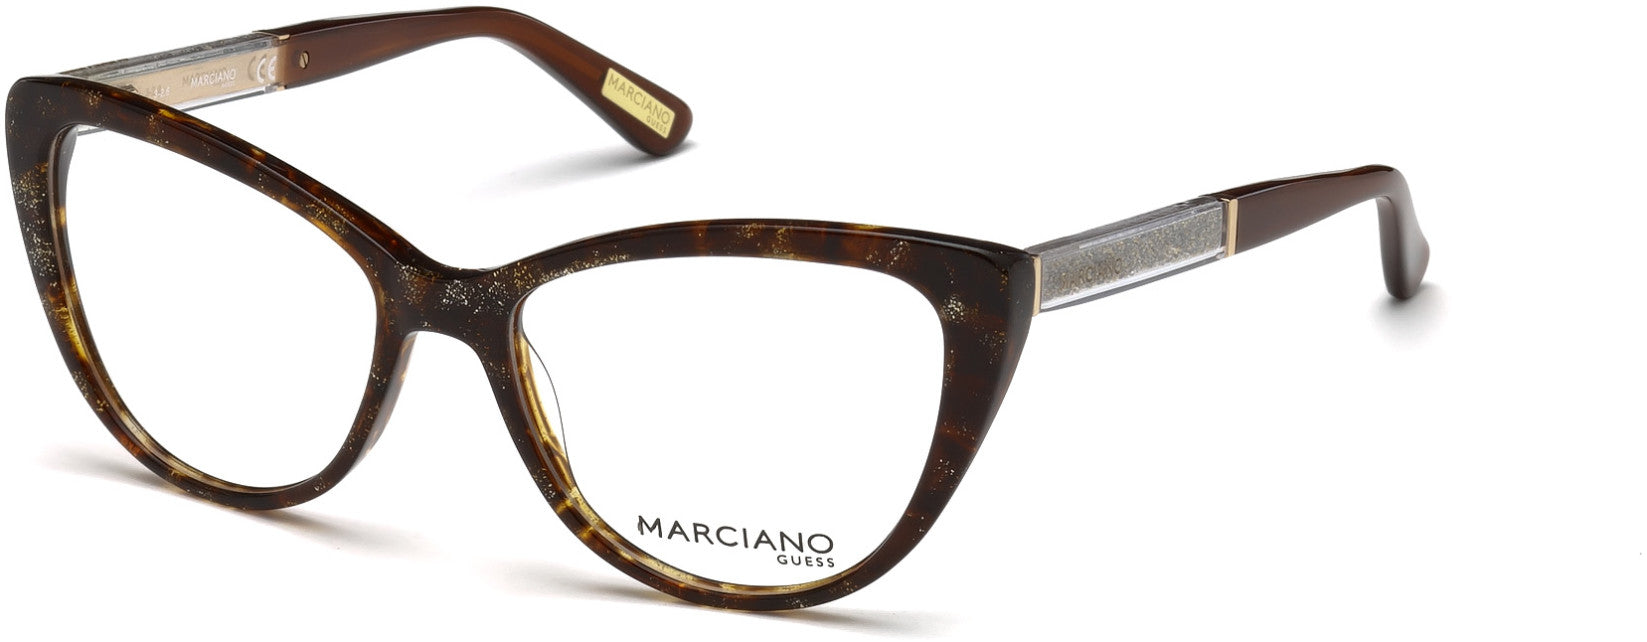 Guess By Marciano GM0312 Cat Eyeglasses 050-050 - Dark Brown/other